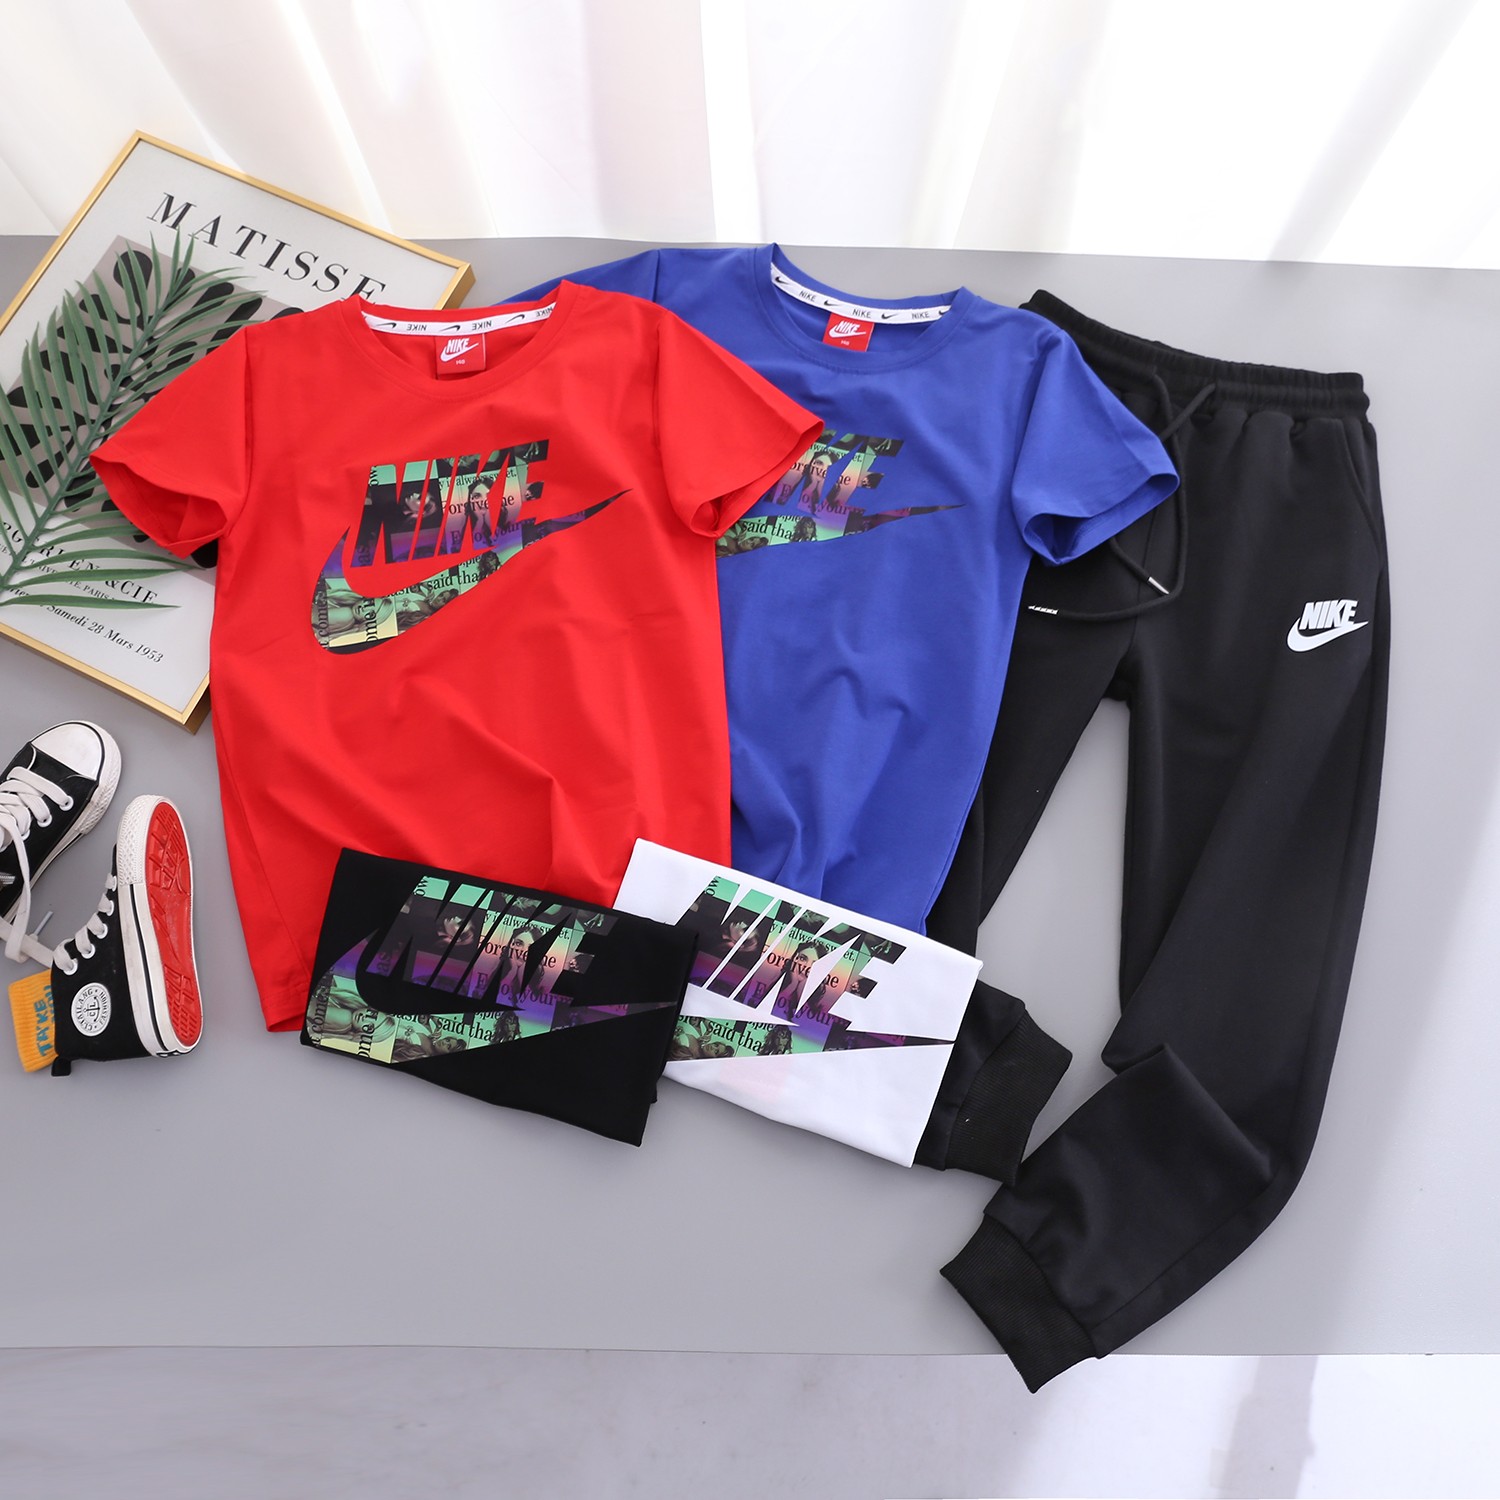 Nike Clothing Pants & Trousers T-Shirt Two Piece Outfits & Matching Sets Green Cotton Short Sleeve